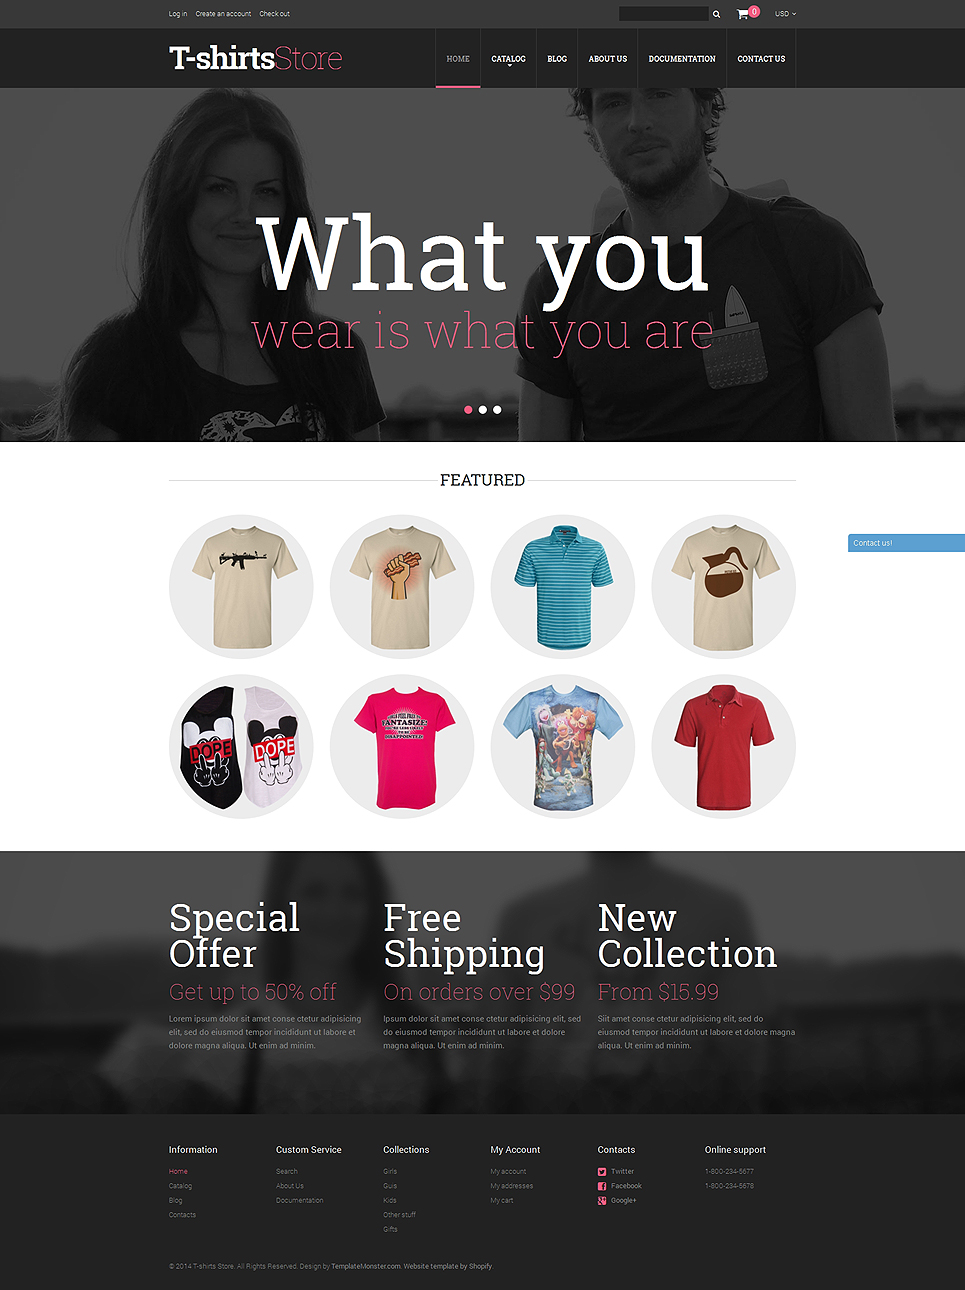 9 Stunning Tshirt Store Themes For Shopify